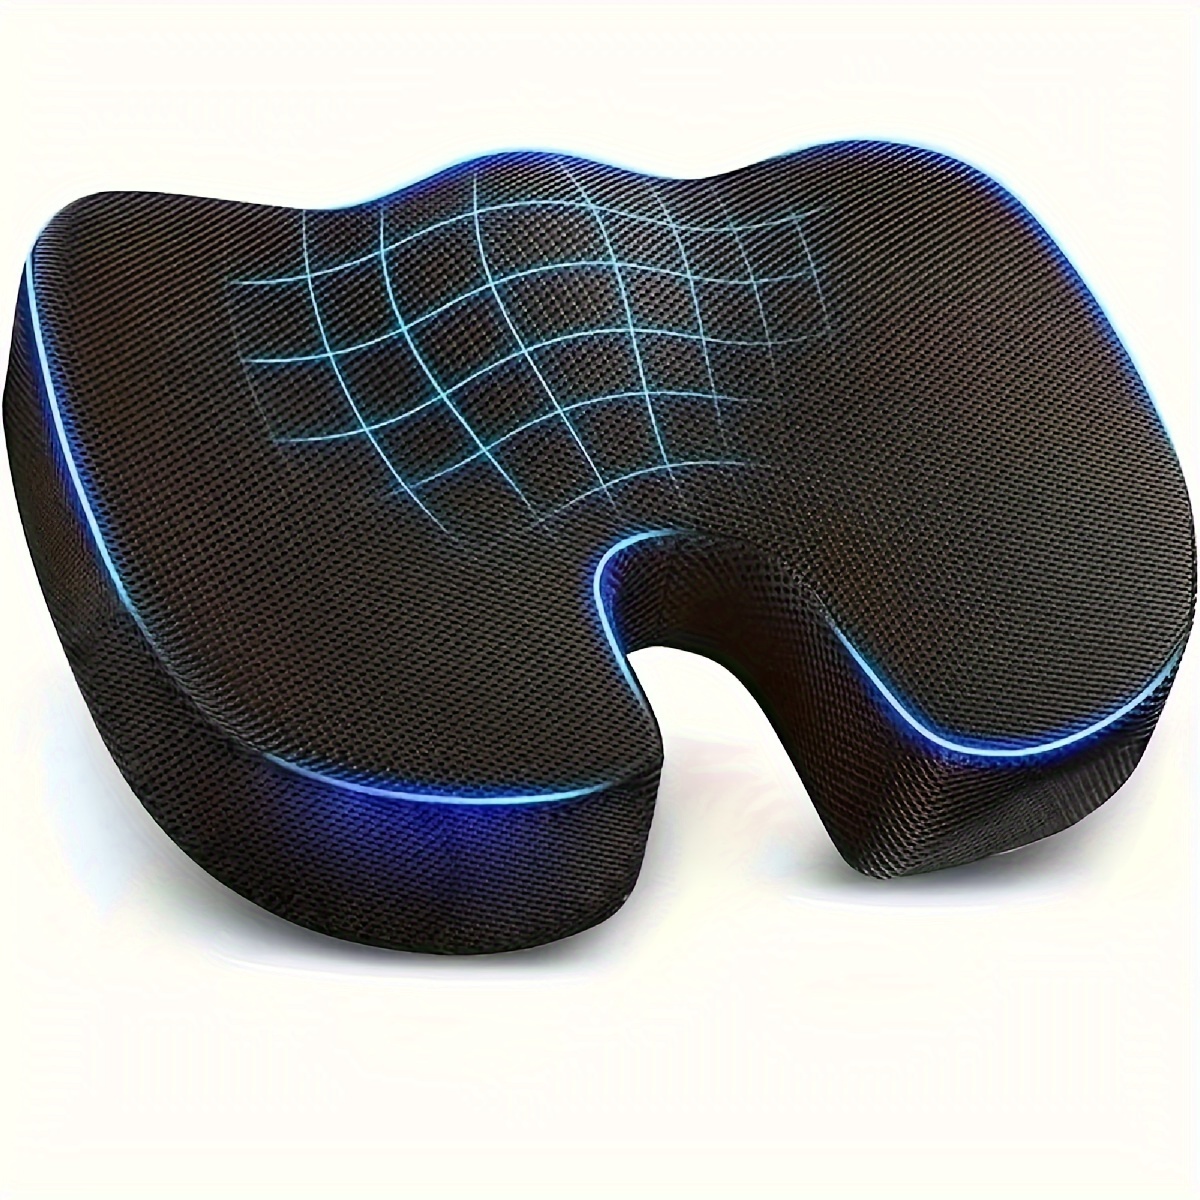 

Ergonomic Memory Foam Seat Cushion For Office Chair And Car - Cooling, Soft Cotton Surface, Lightweight, Machine Washable Cover With U-shaped Design For Tailbone Support And Comfort